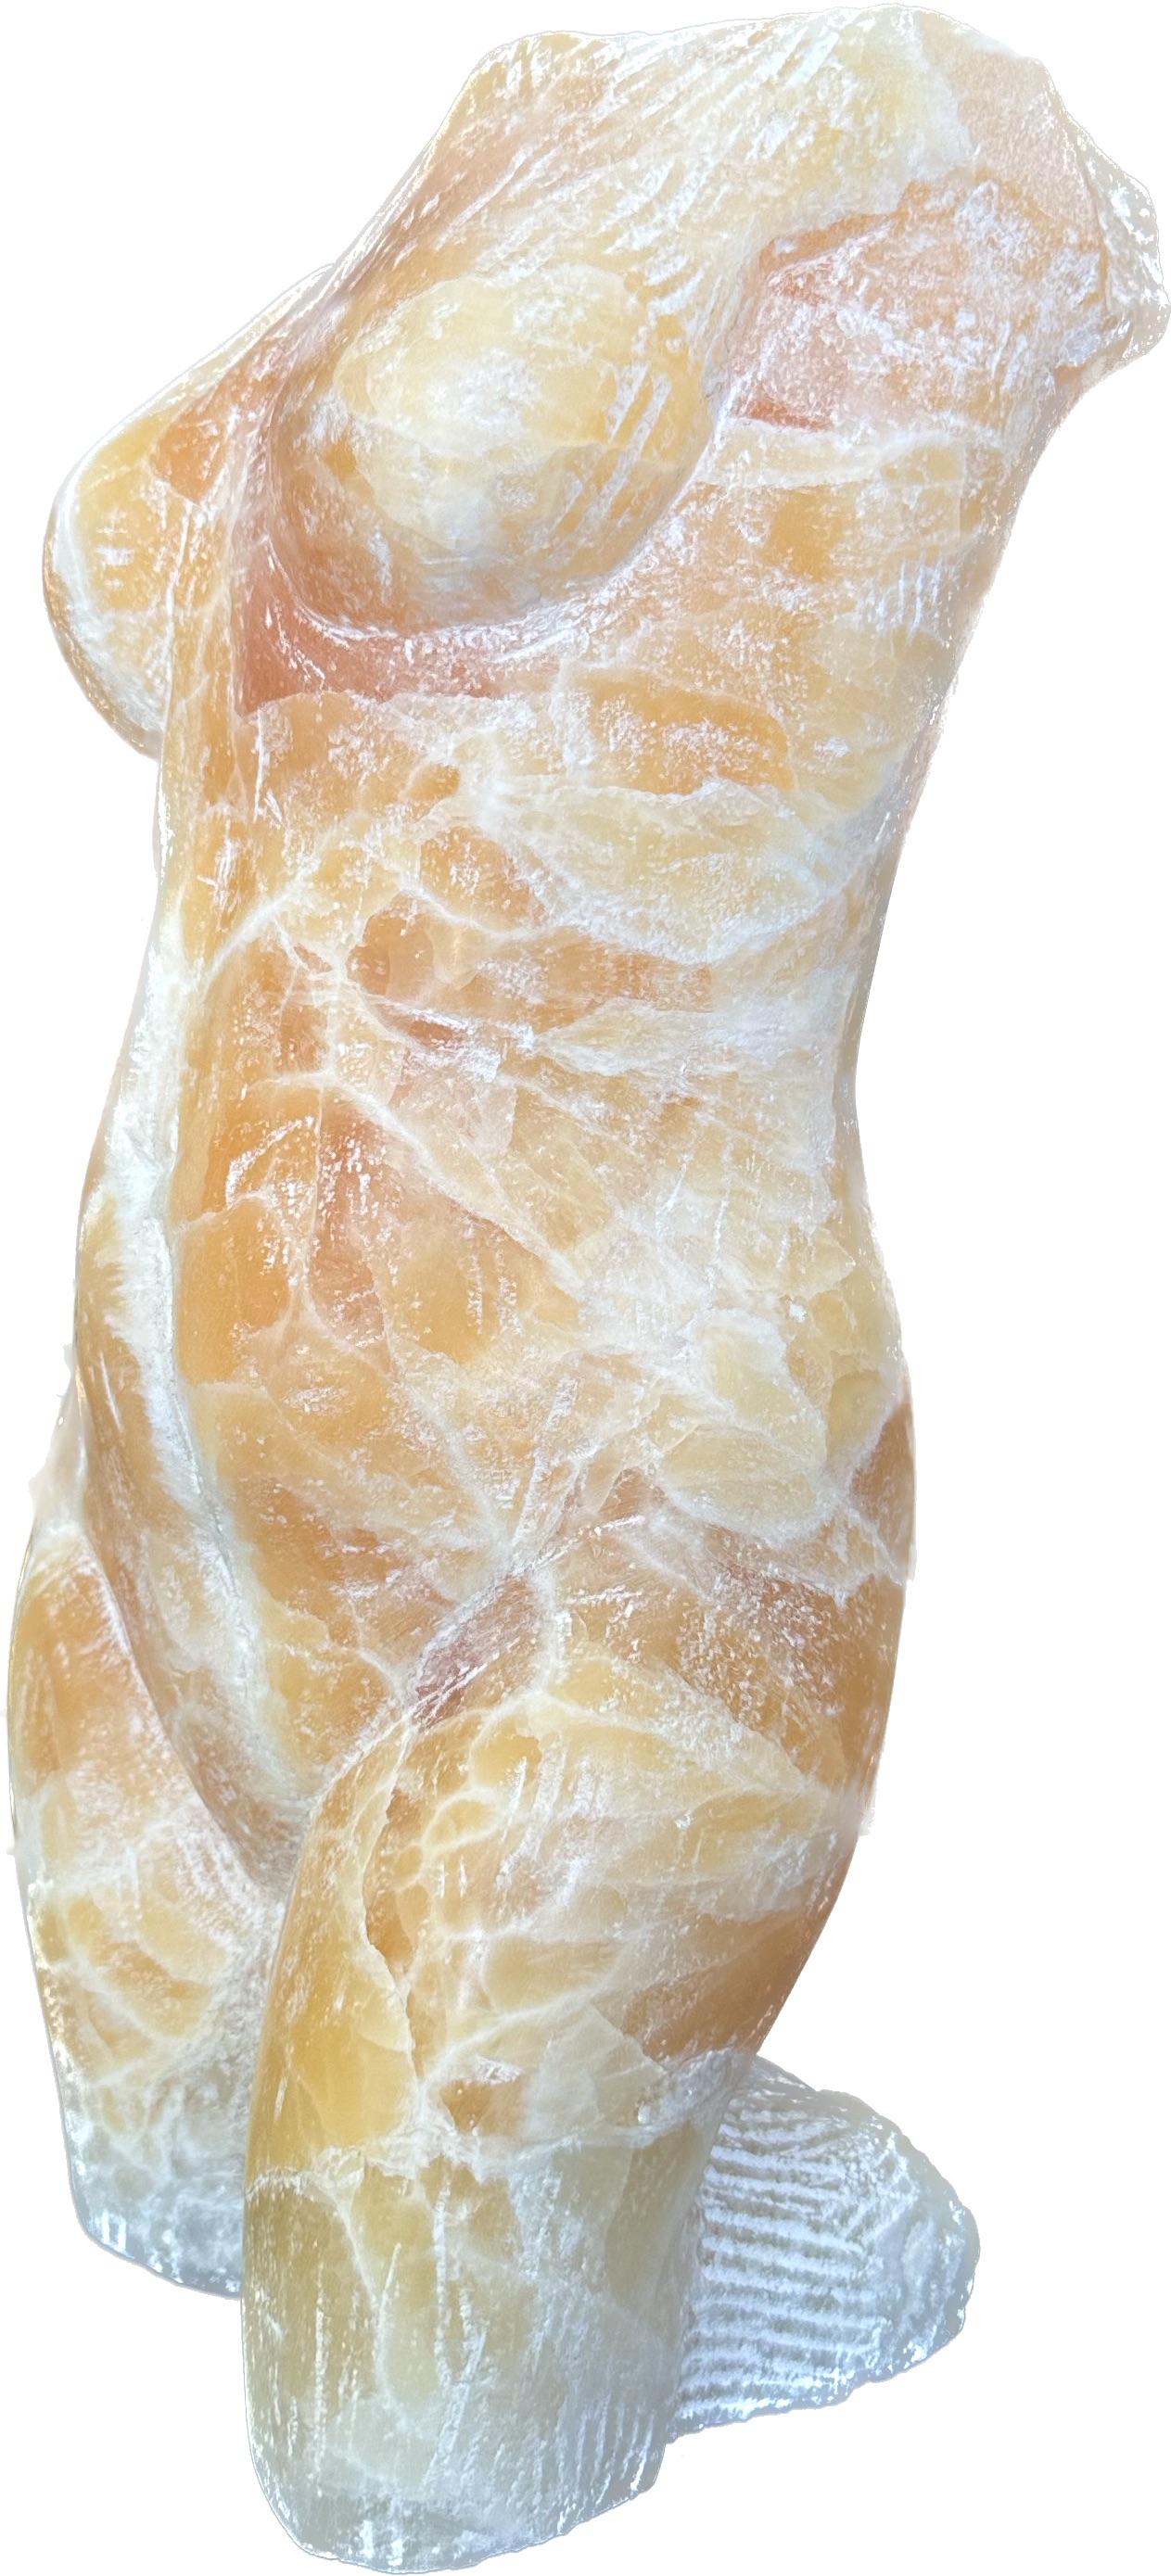 Nude, Sculpture, Natural Onyx Stone, handmade by Garo For Sale 1